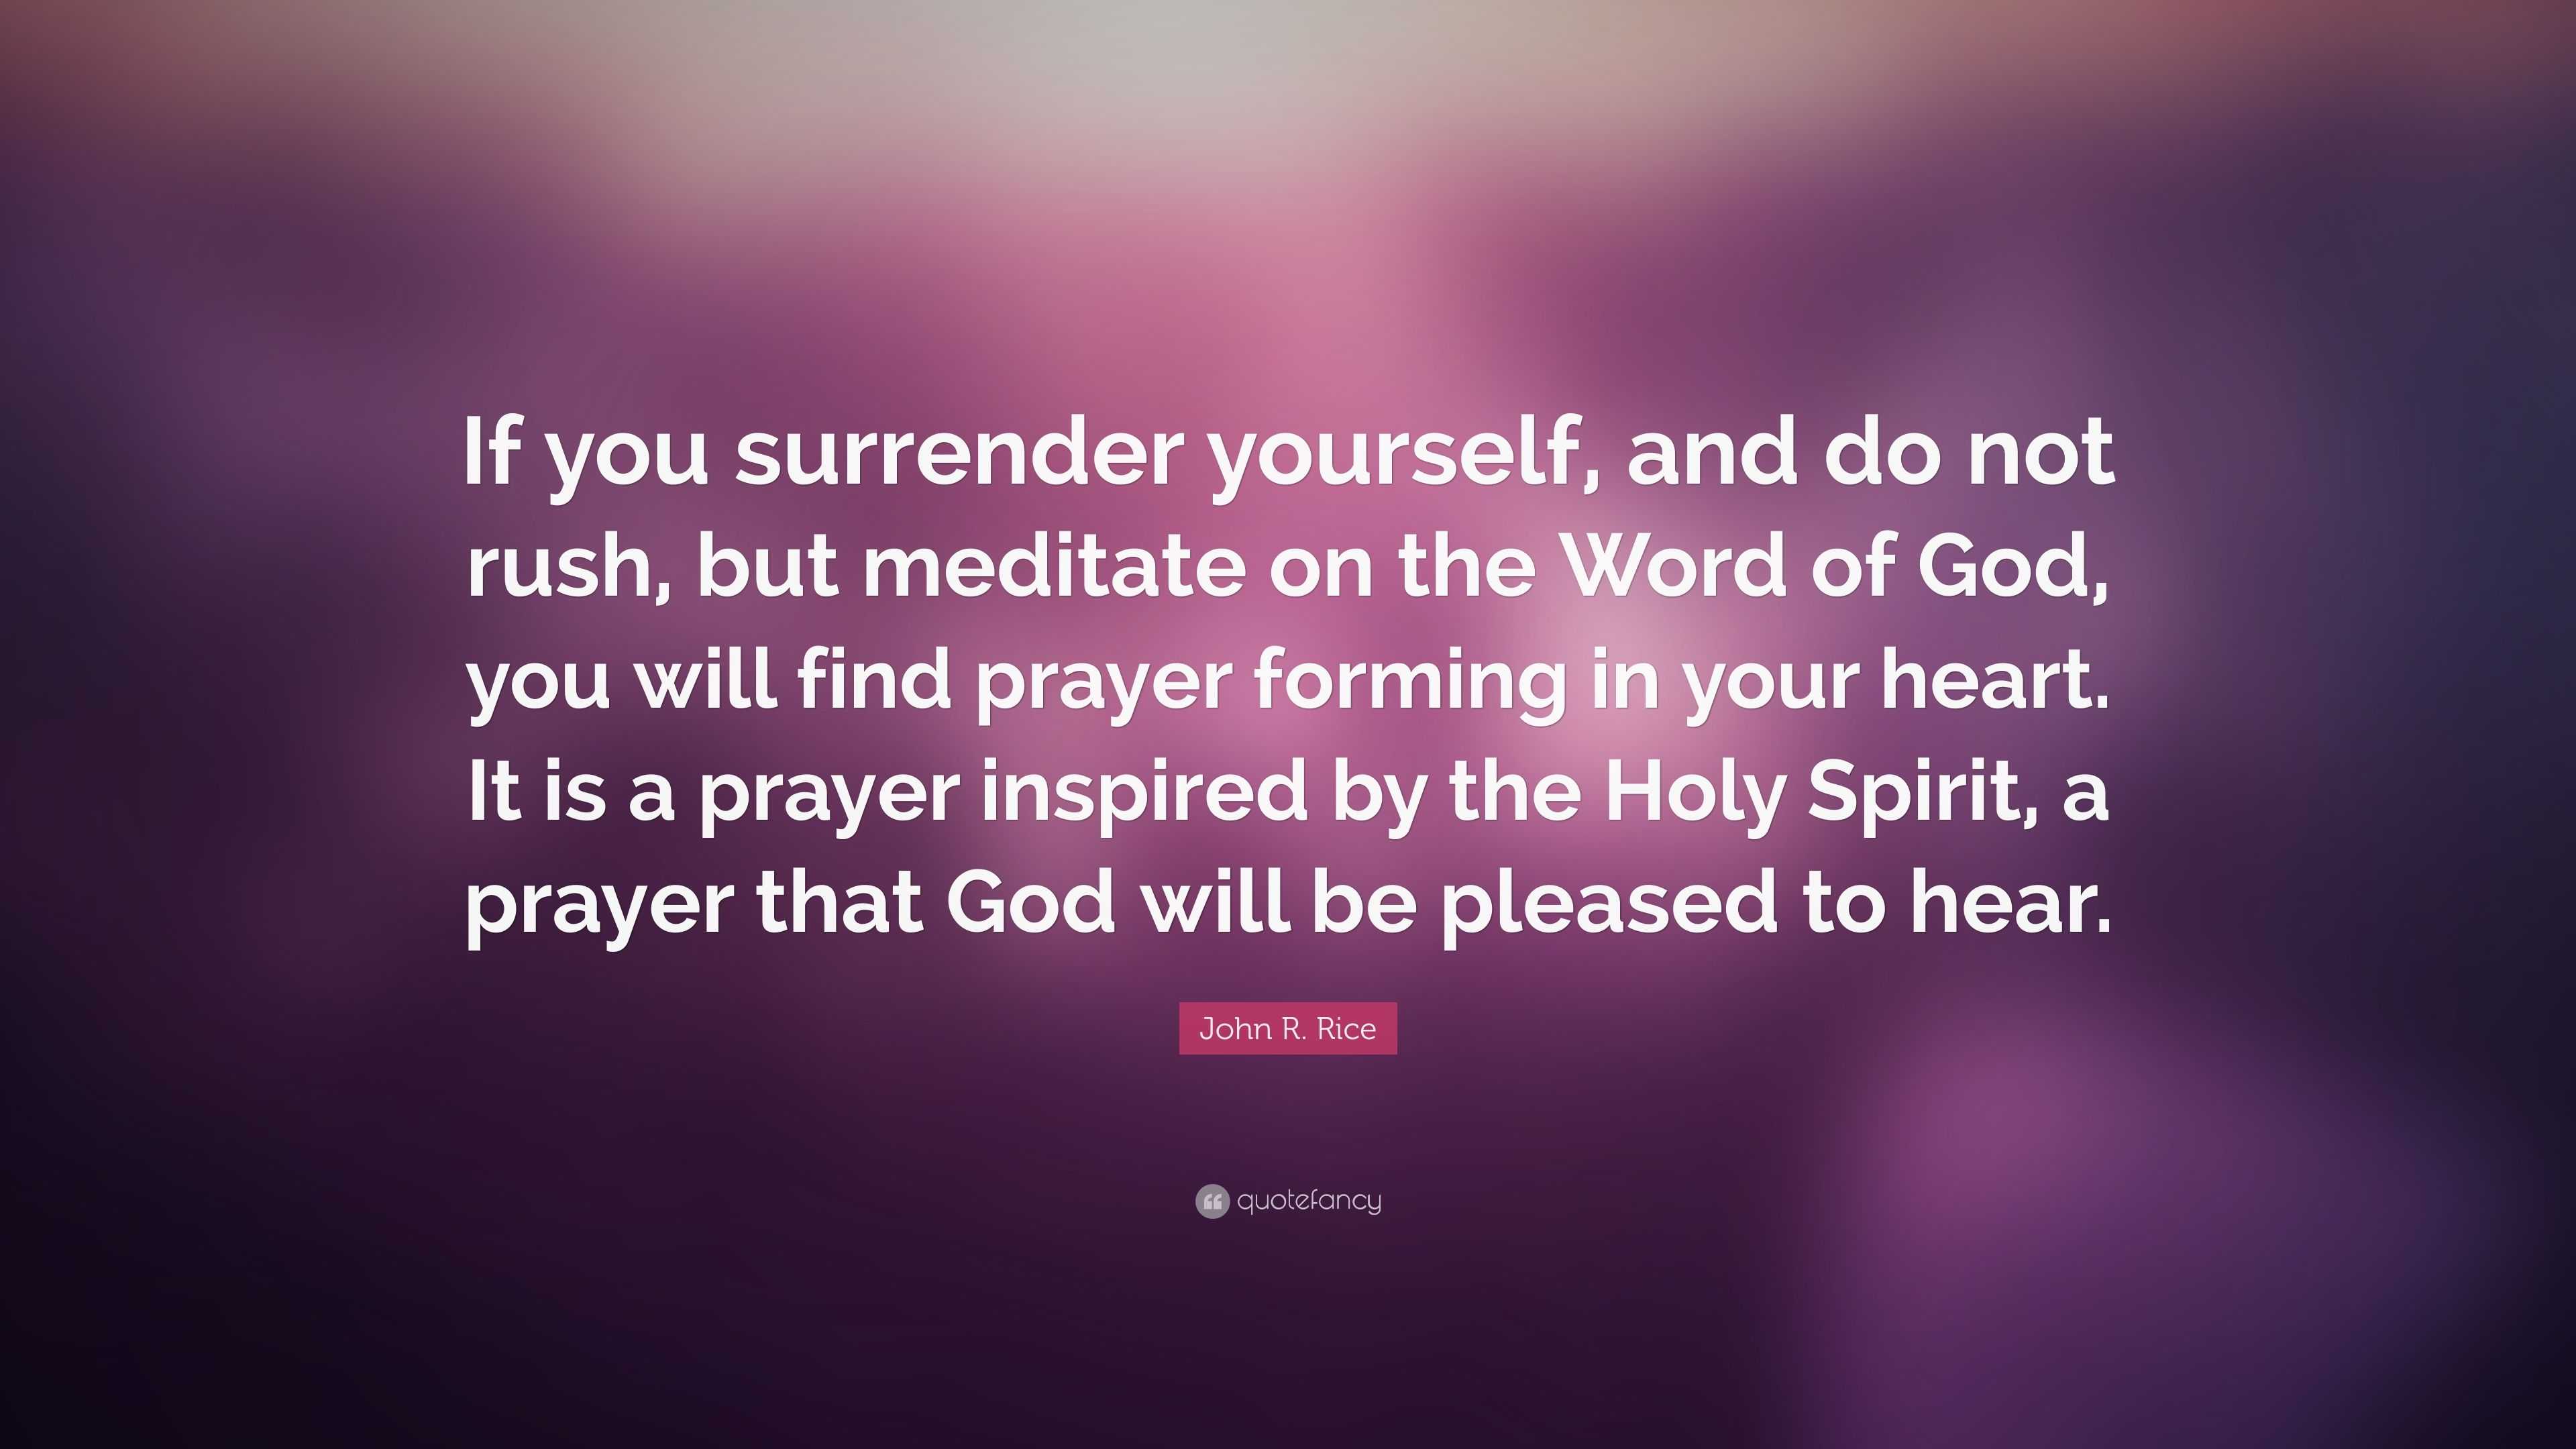 Absolute surrender to God during wuquf